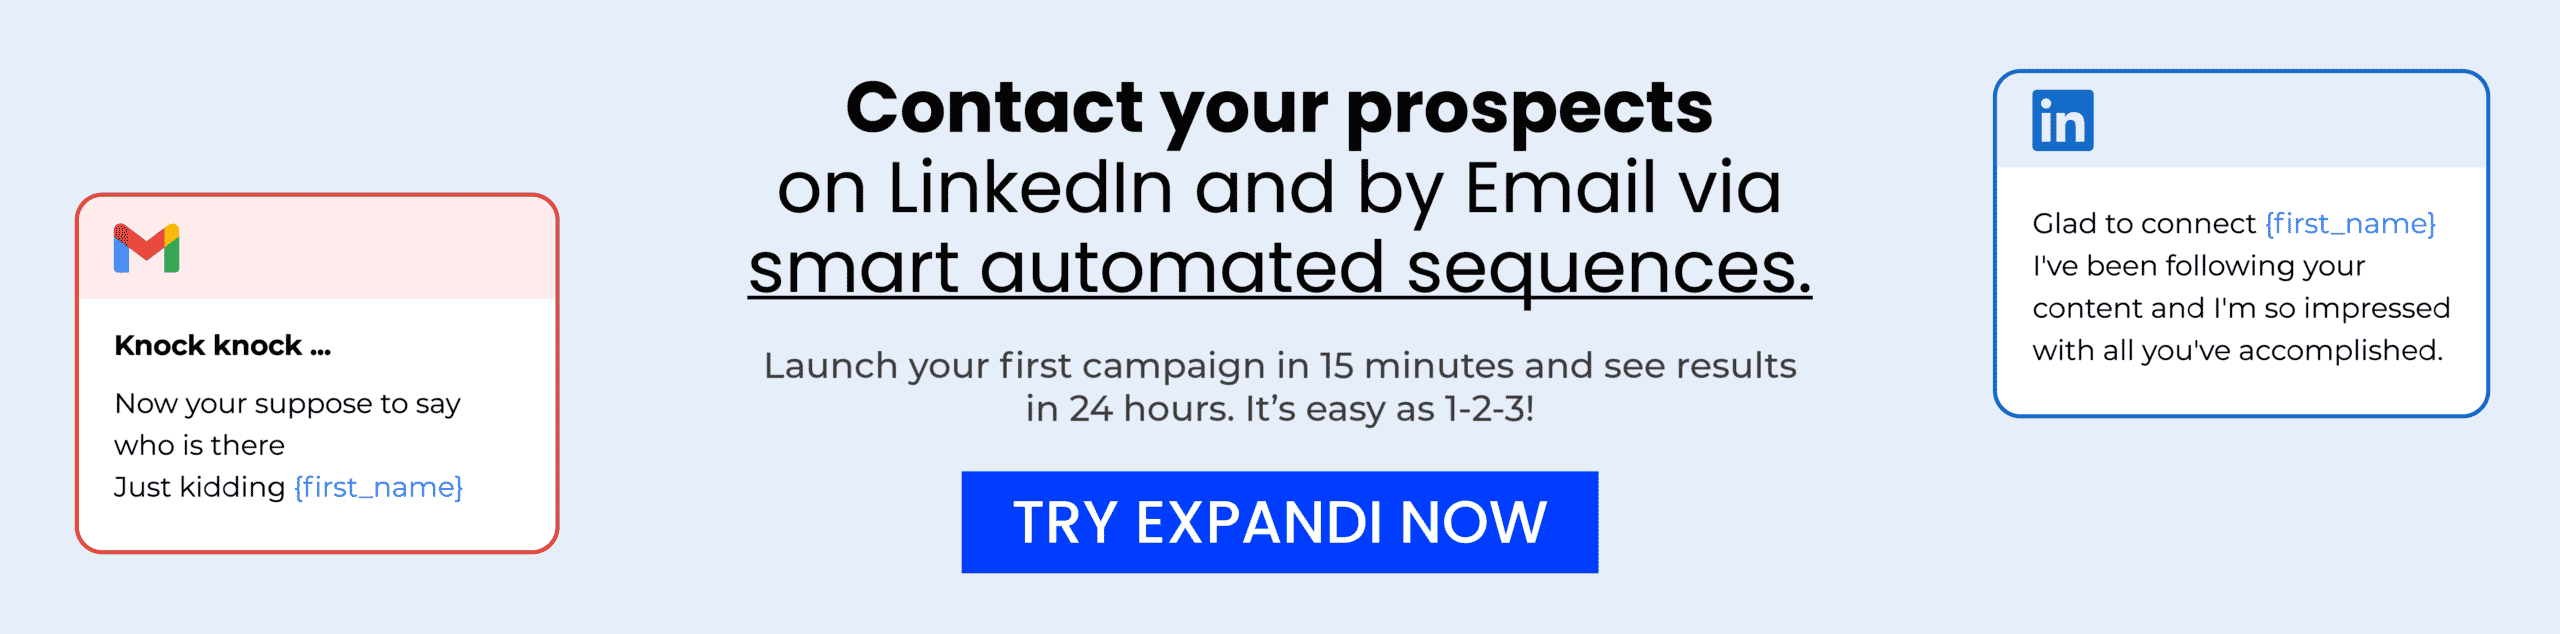 contact-your-prospects